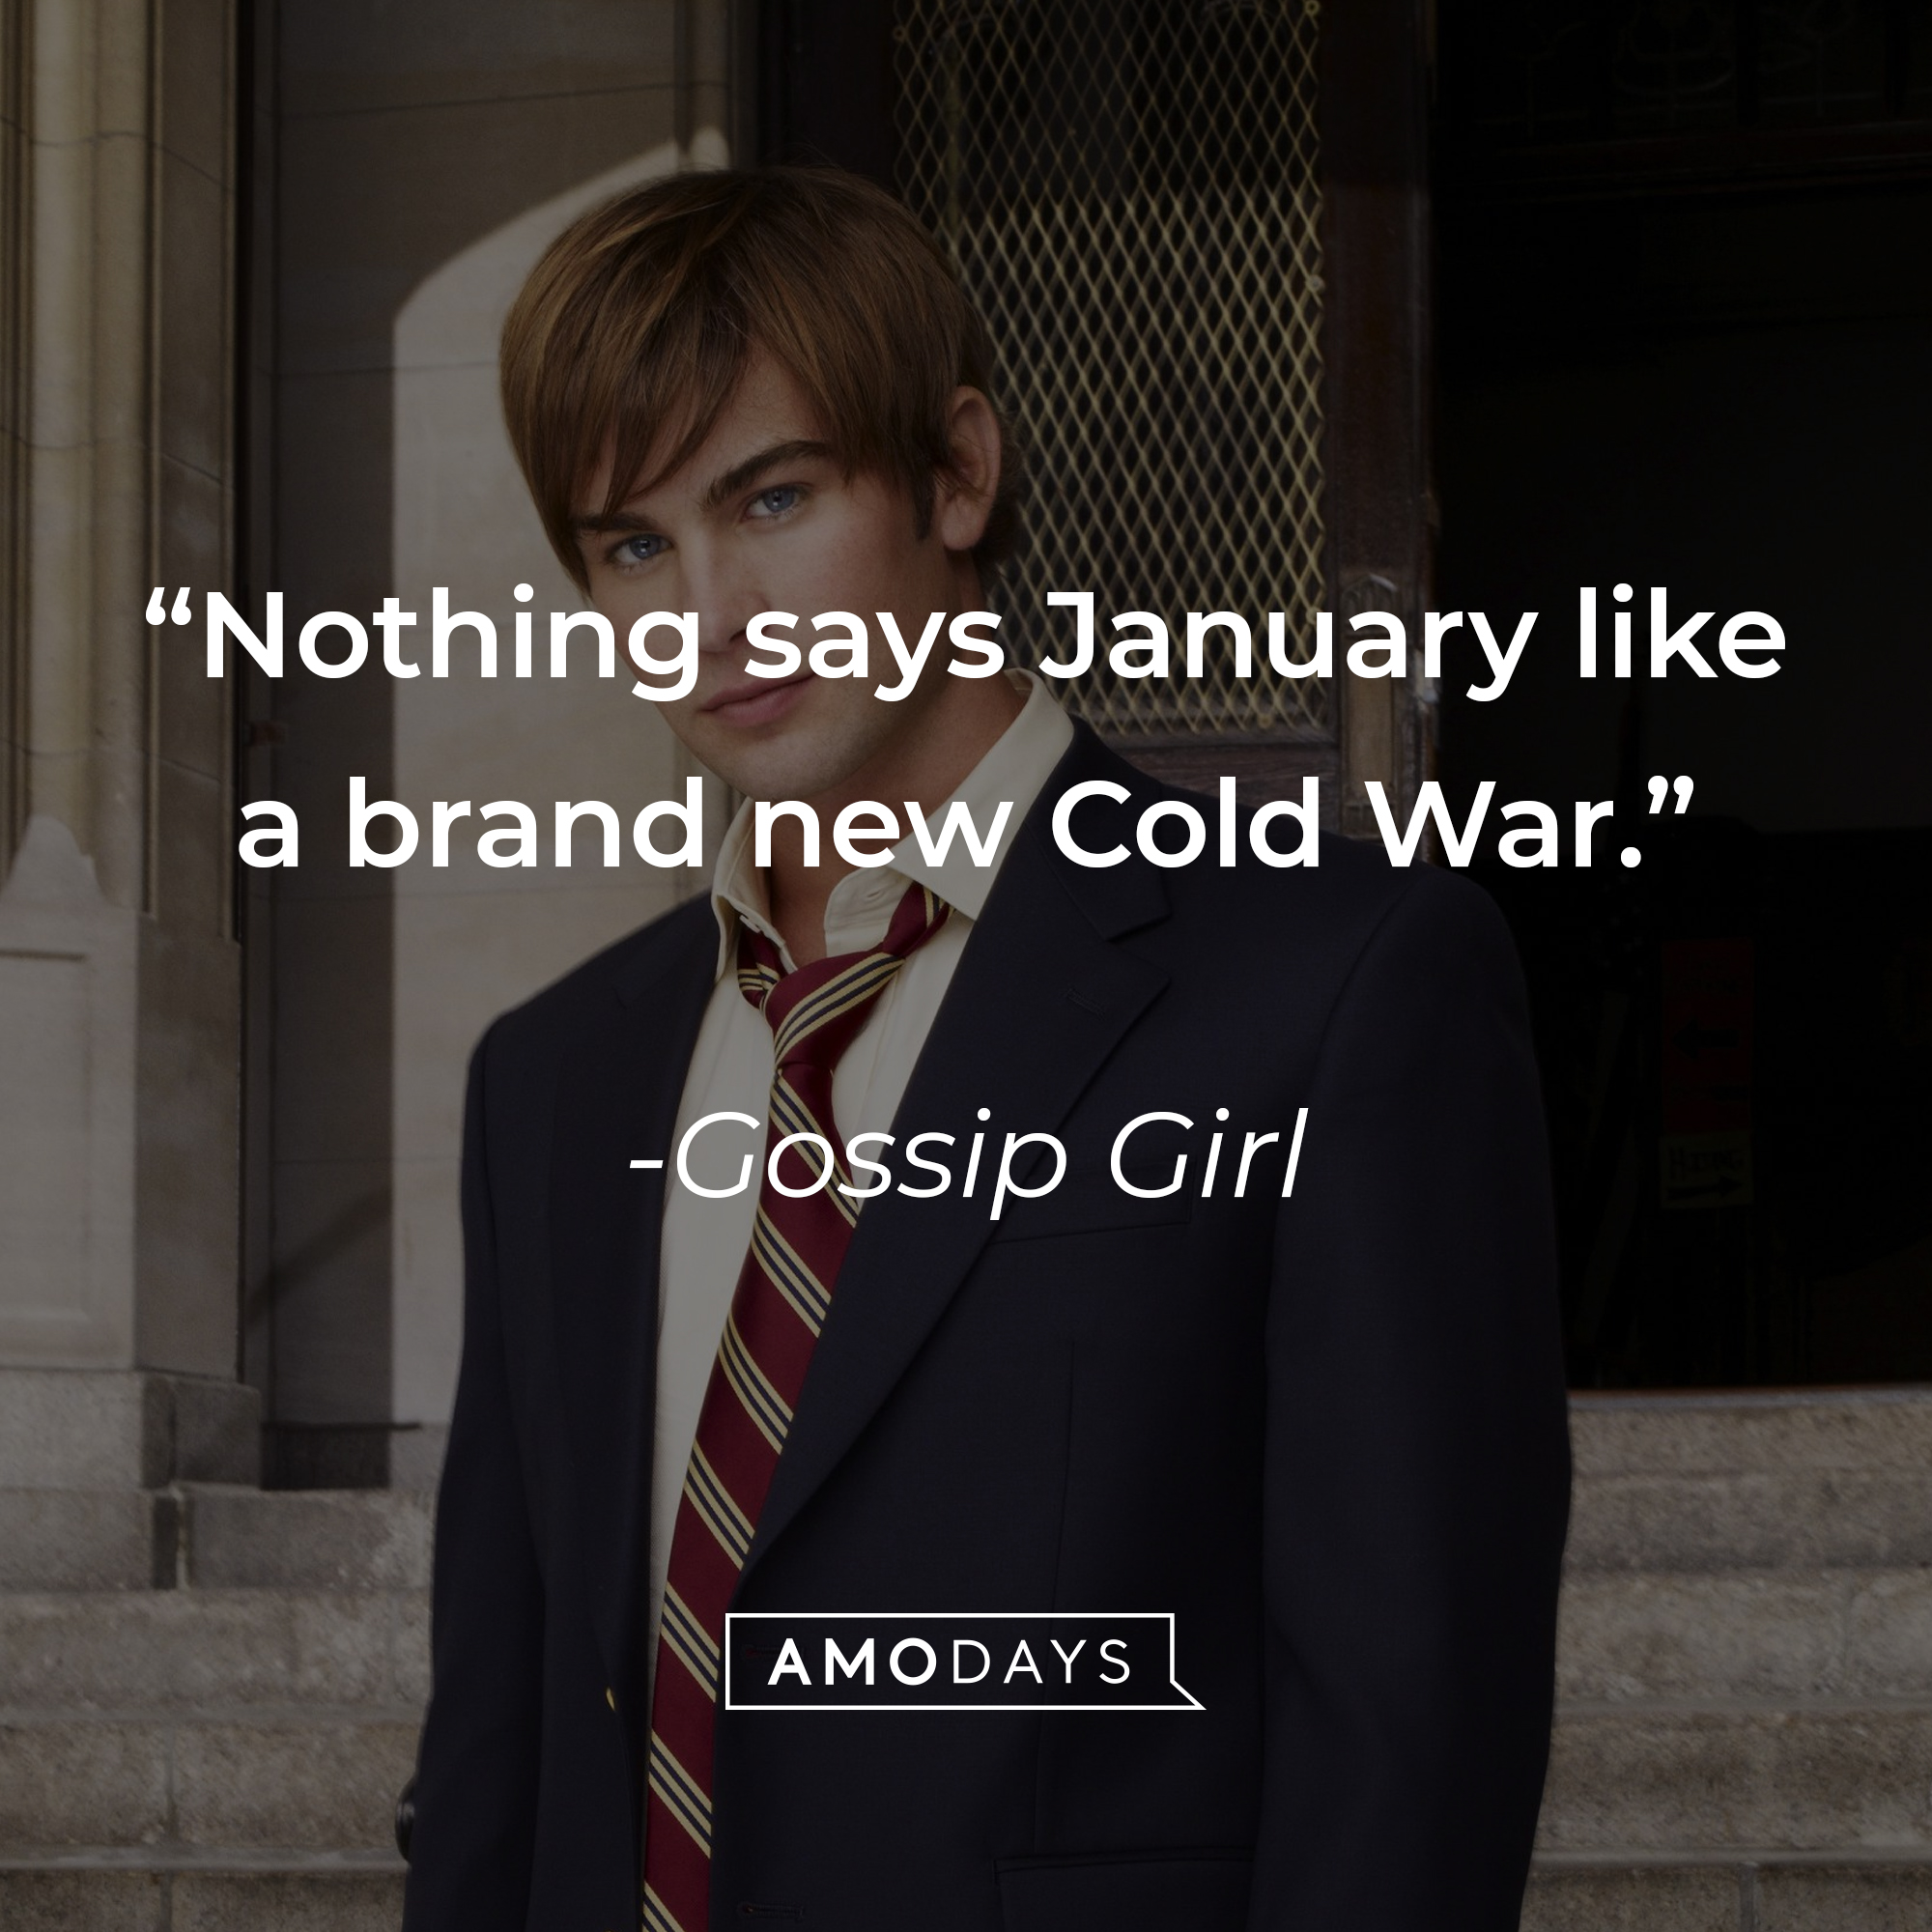 Image from "Gossip Girl" with the quote: "Nothing says January like a brand new Cold War." | Source: facebook.com/GossipGirl